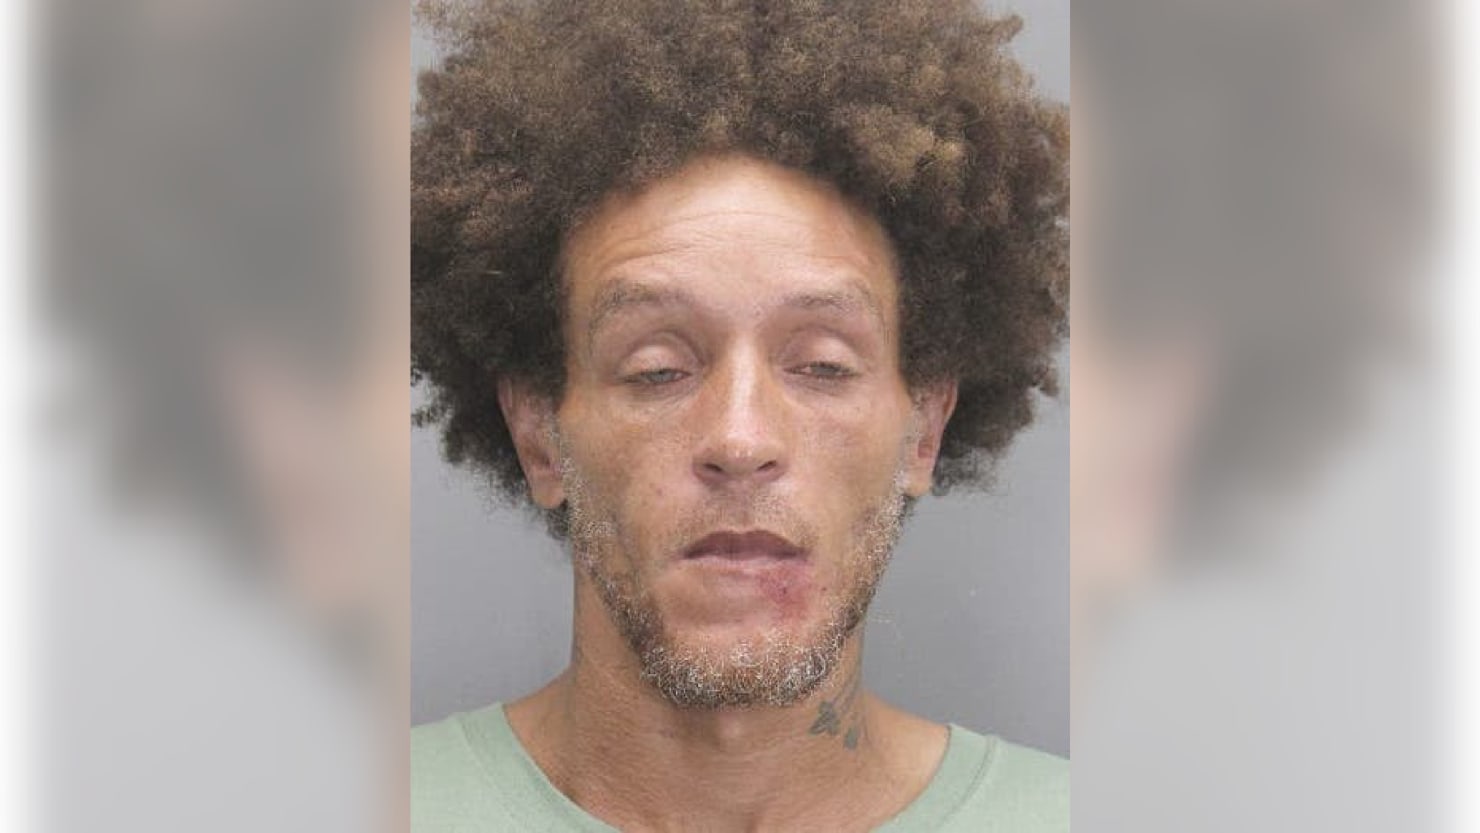 Ex-NBA Star Delonte West Arrested in Virginia Amid Ongoing Struggles with Mental Health and Legal Issues